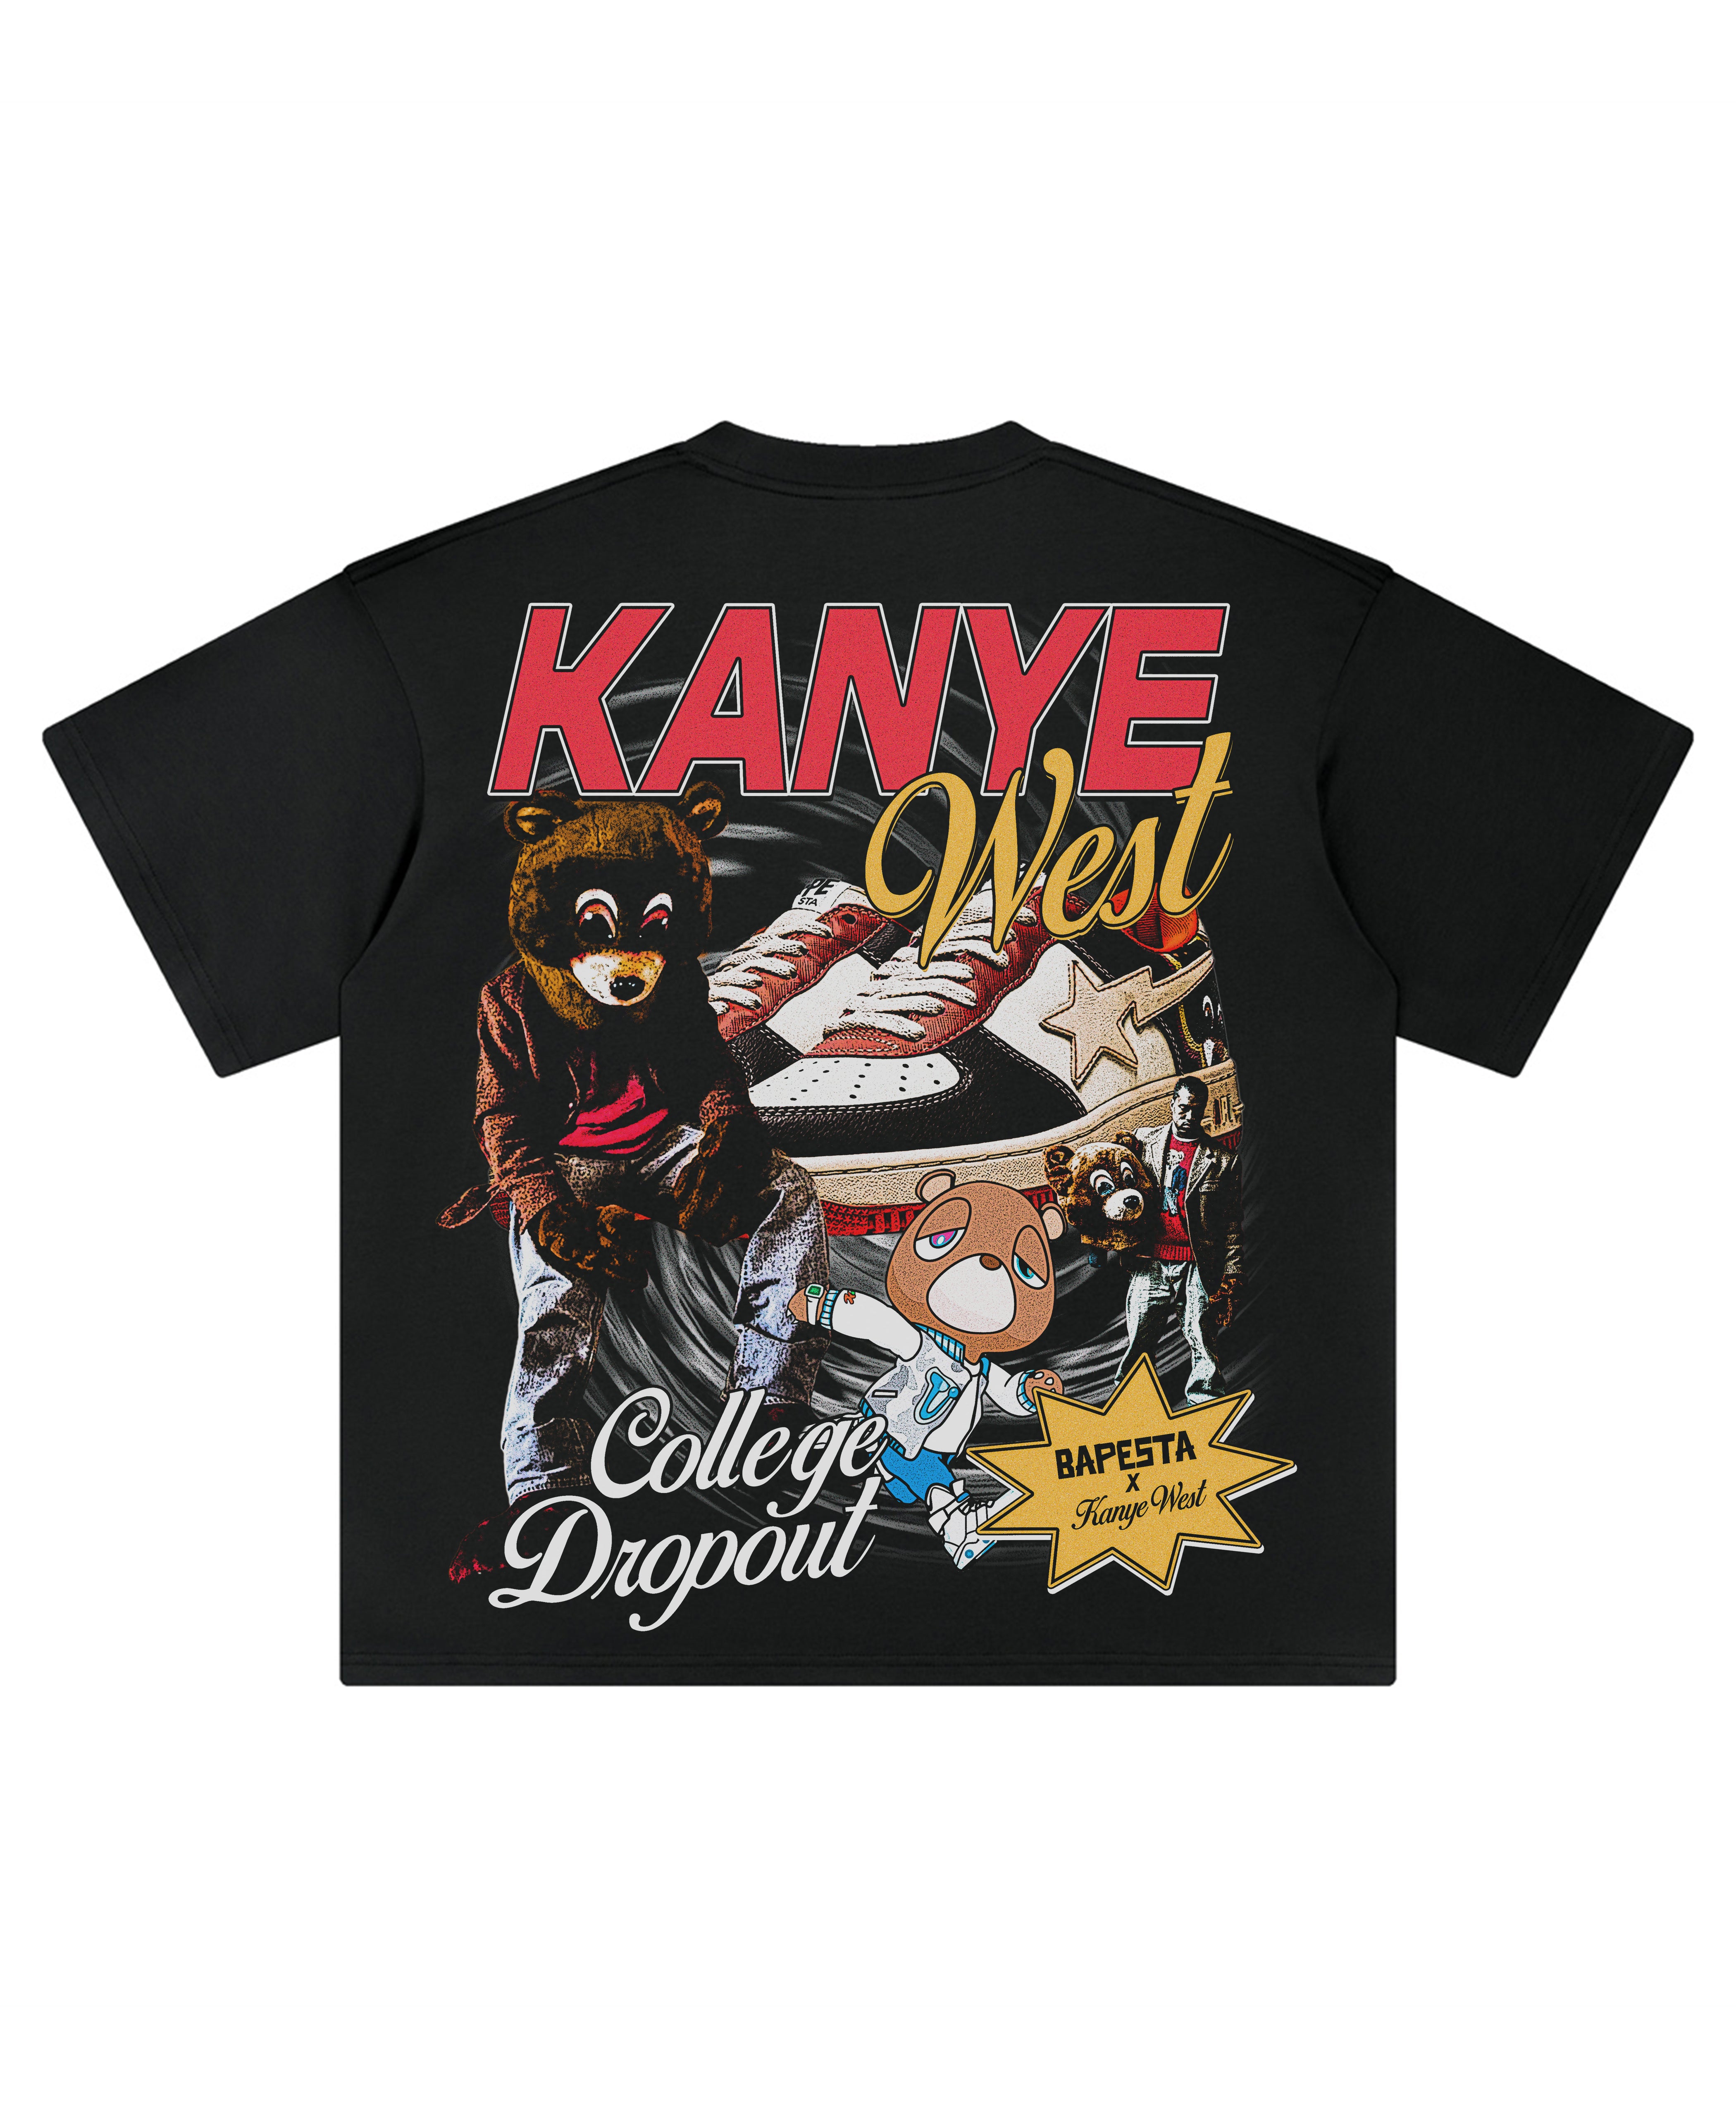 KANYE COLLEGE DROPOUT TEE